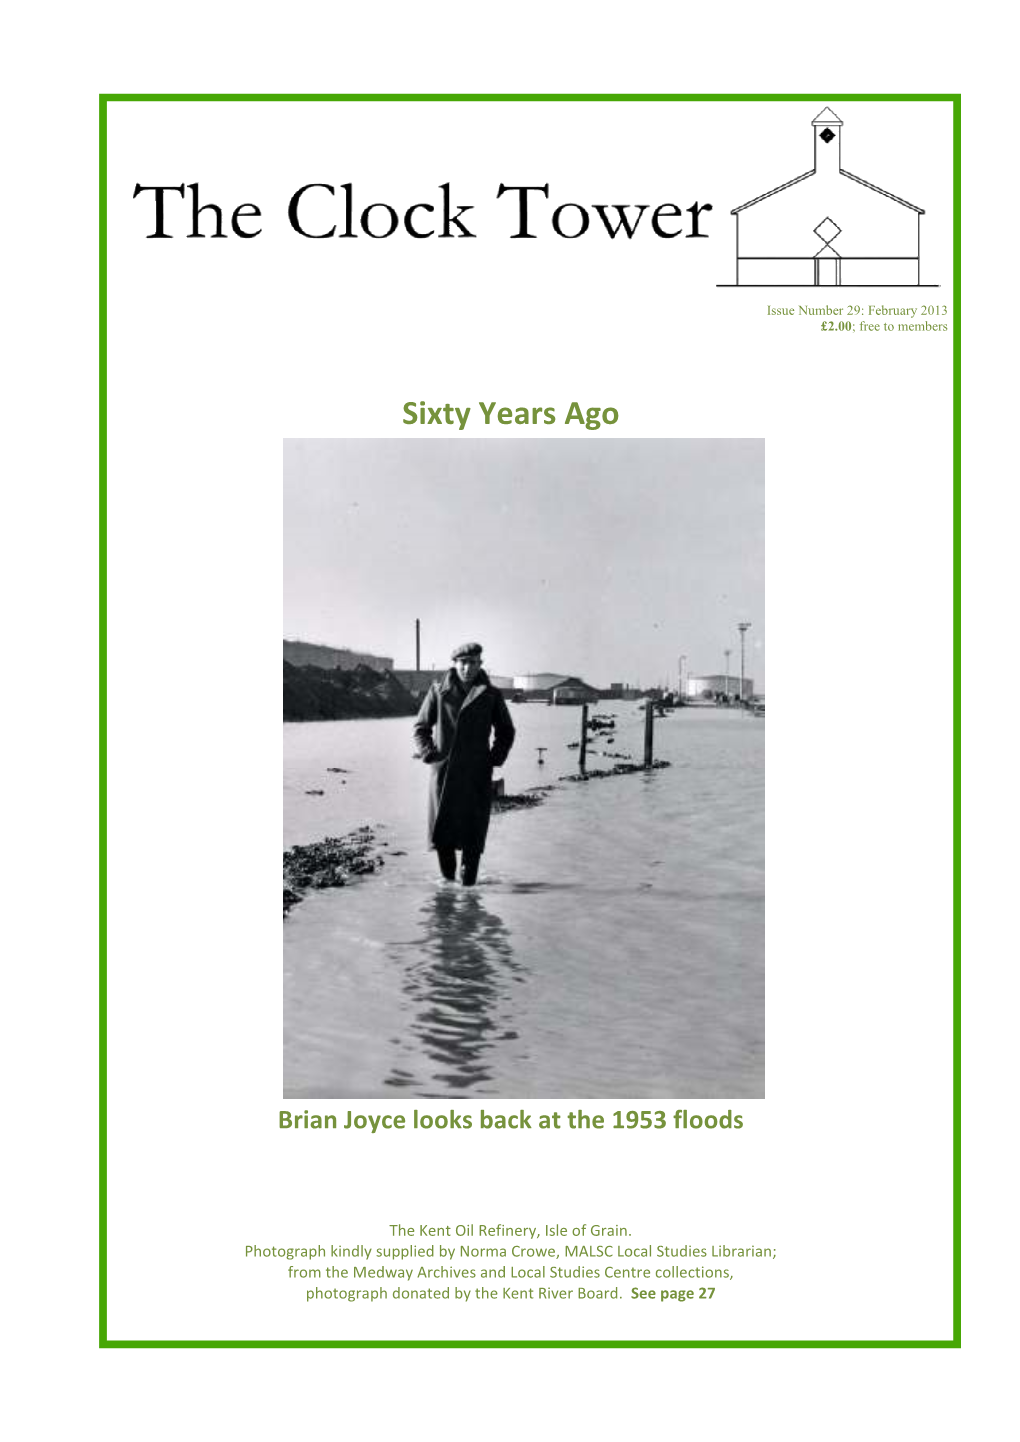 The 1953 Floods in NW Kent (See Norma Crowe's Article on Page 31)